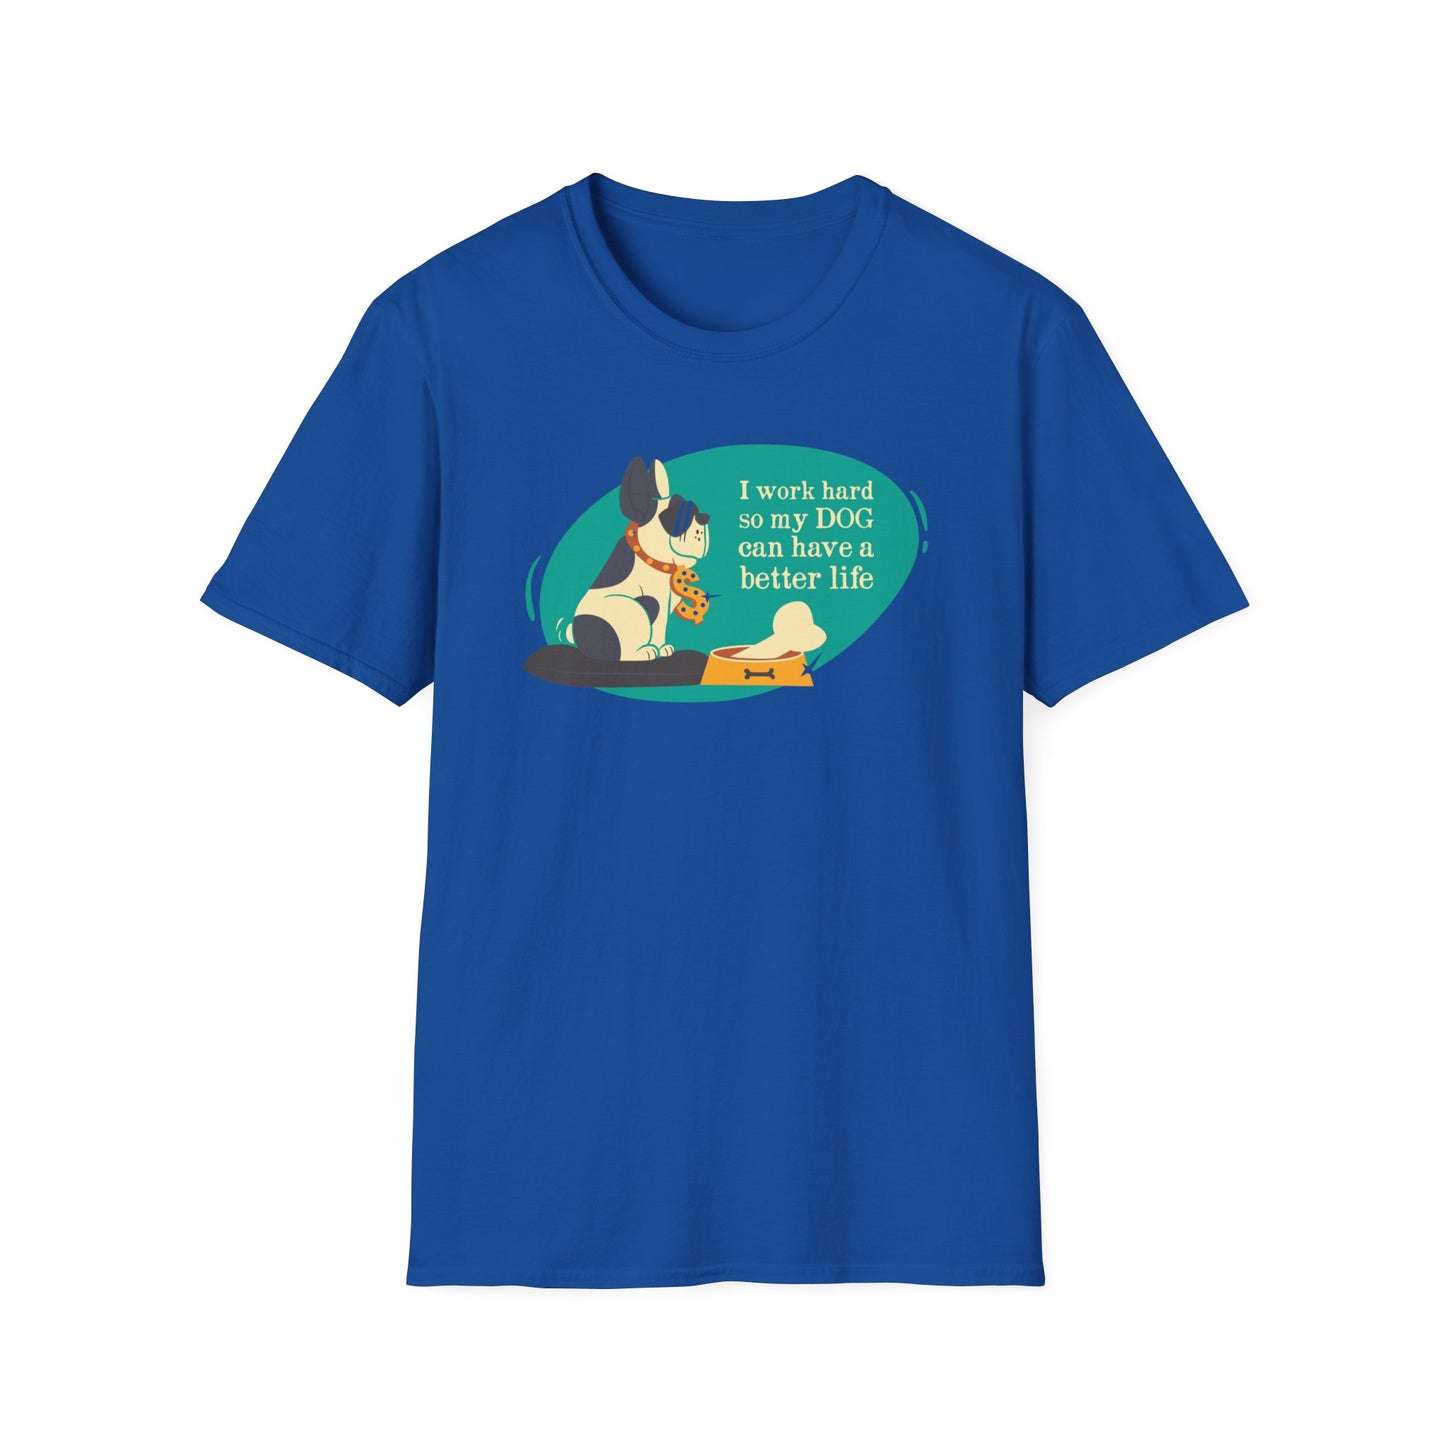 I Work Hard So My Dog Can Have a Better Life T-shirts for Dog Lovers!